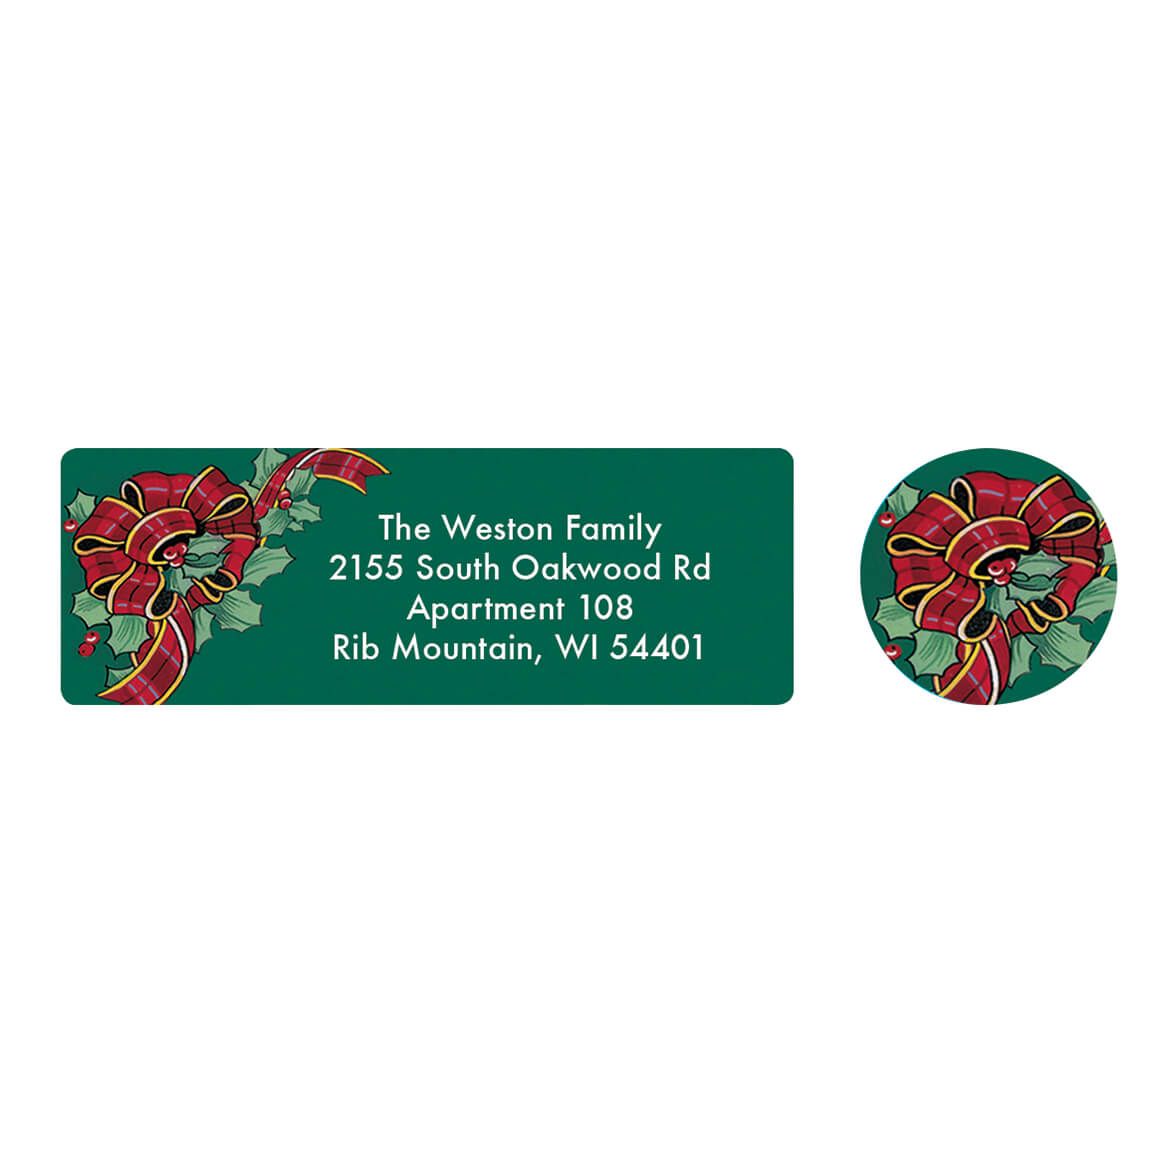 Personalized My Christmas List Address Labels & Seals 20 + '-' + 364697